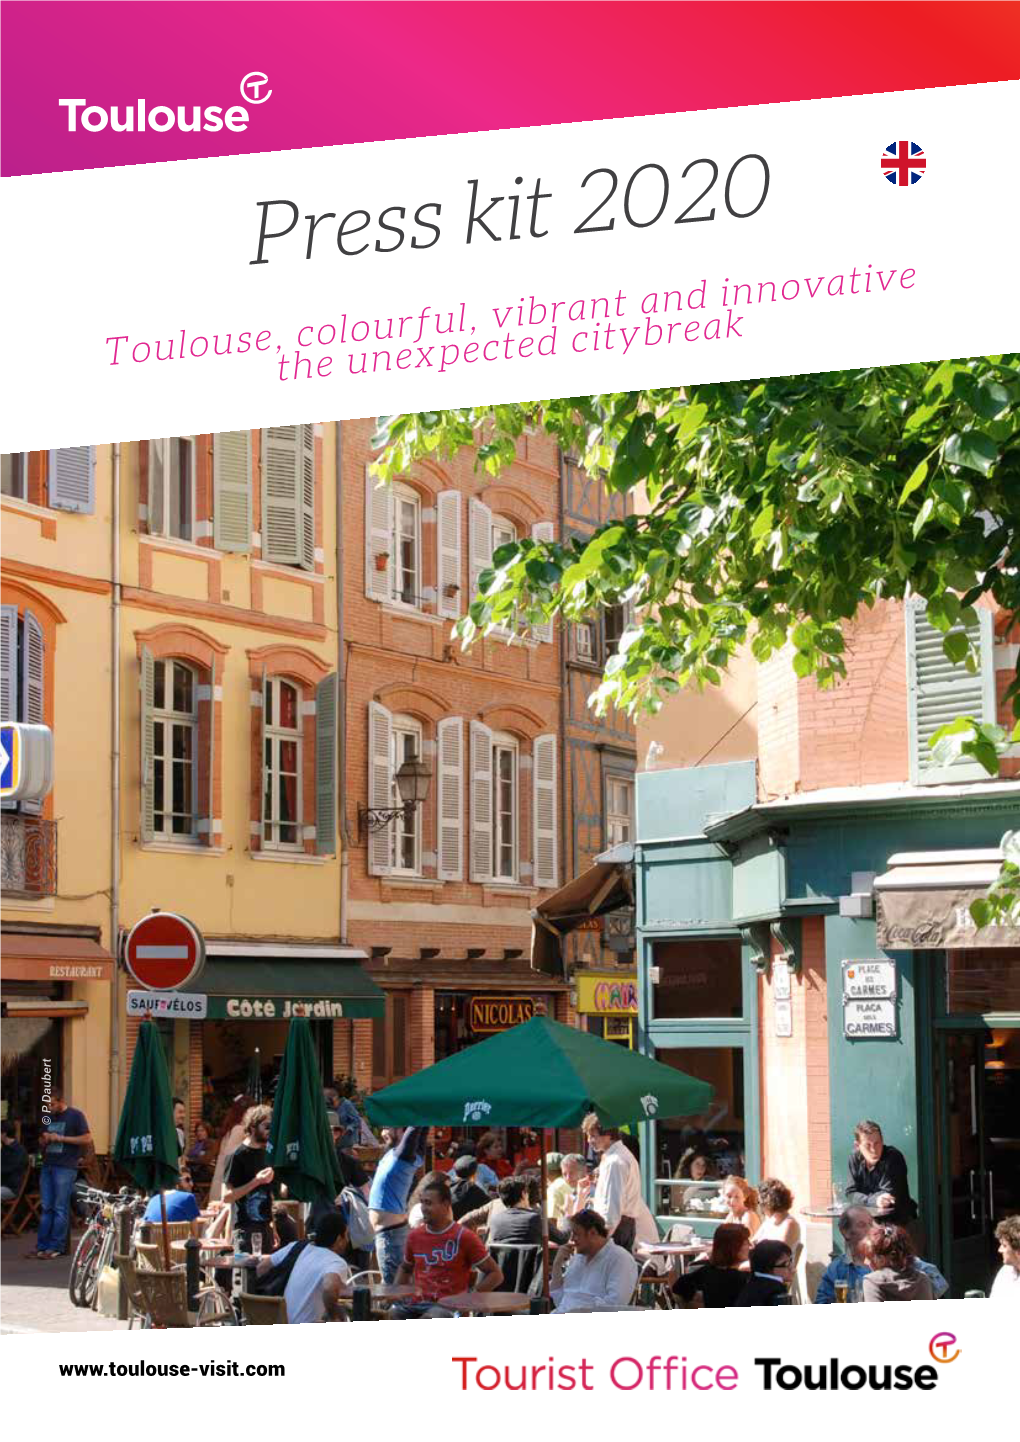 Press Kit 2020 Toulouse,The Colourful, Unexpected Vibrant Citybreak and Innovative © P.Daubert ©